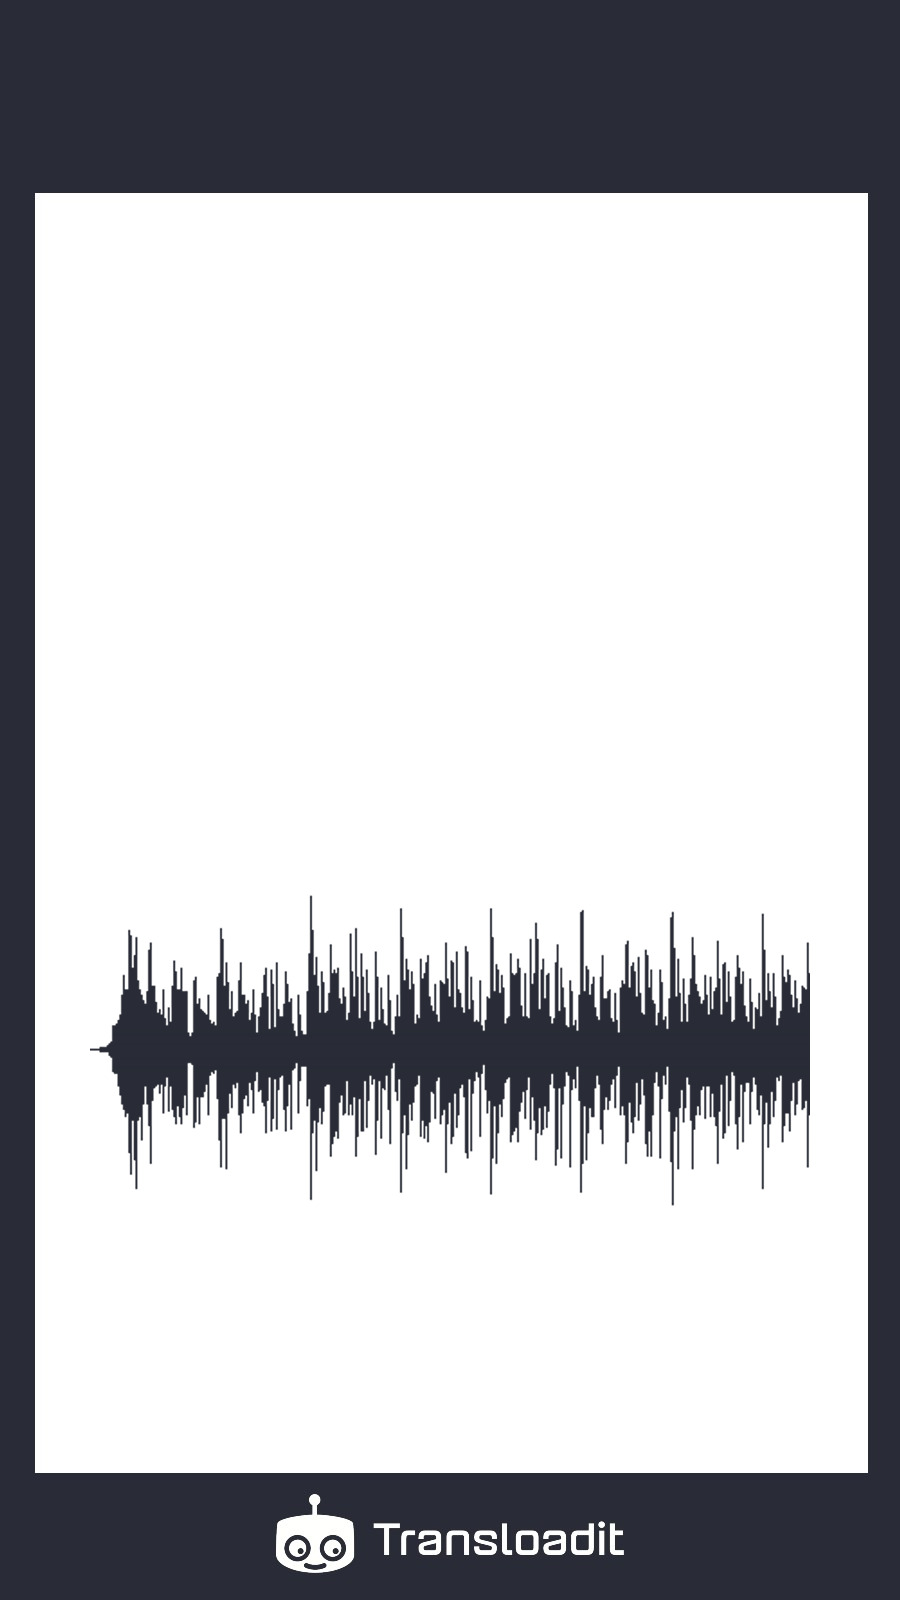 Card with a waveform